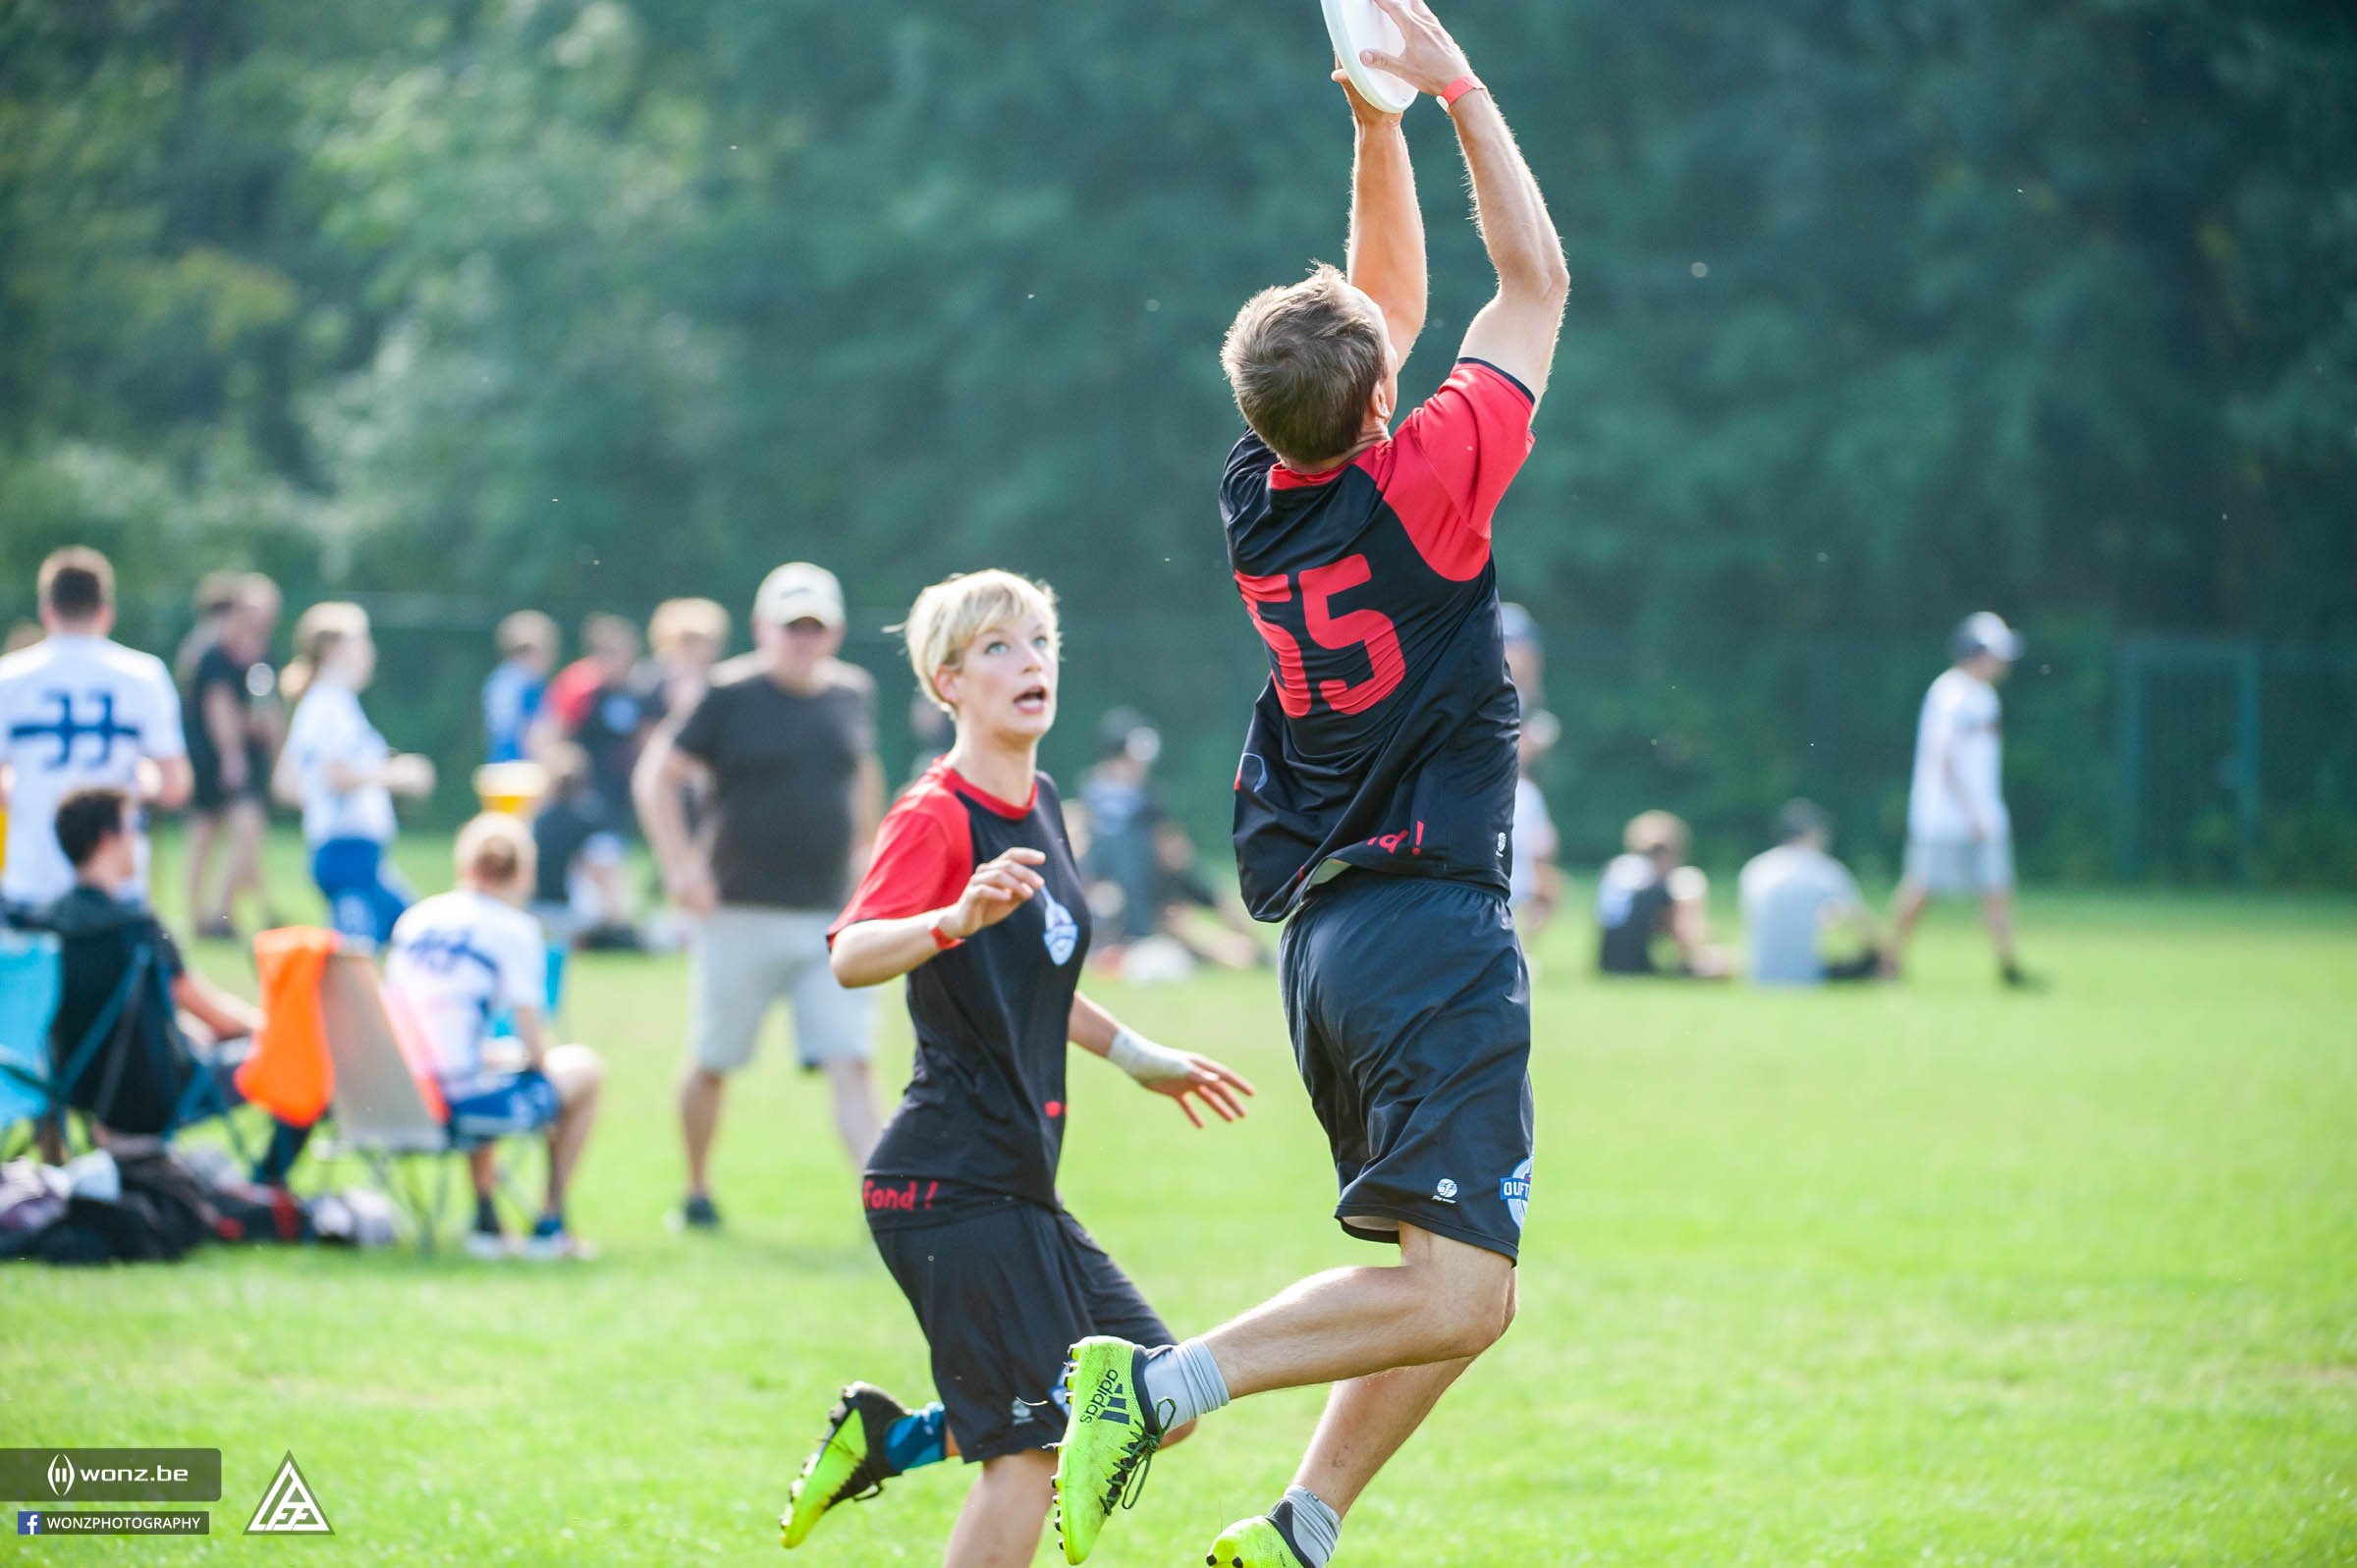 Love At First Flight - LAFF XL - Ultimate Frisbee Tournament